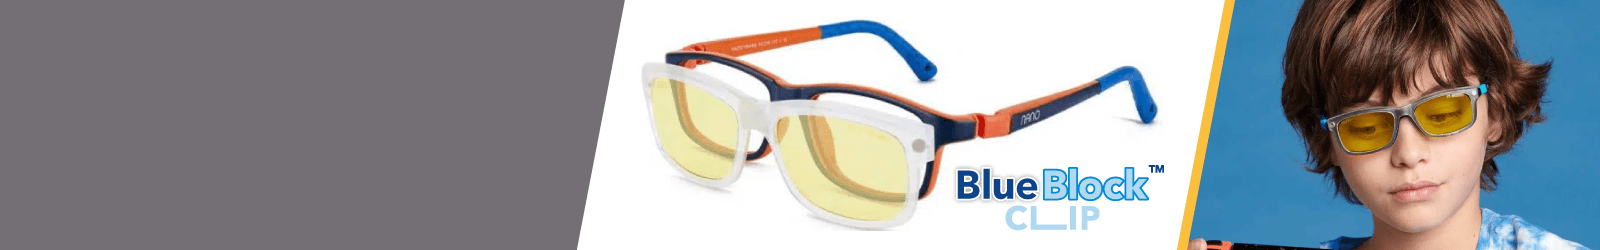 Nano Blue Block Clip Eyewear for Kids from 6 to 8-year-old